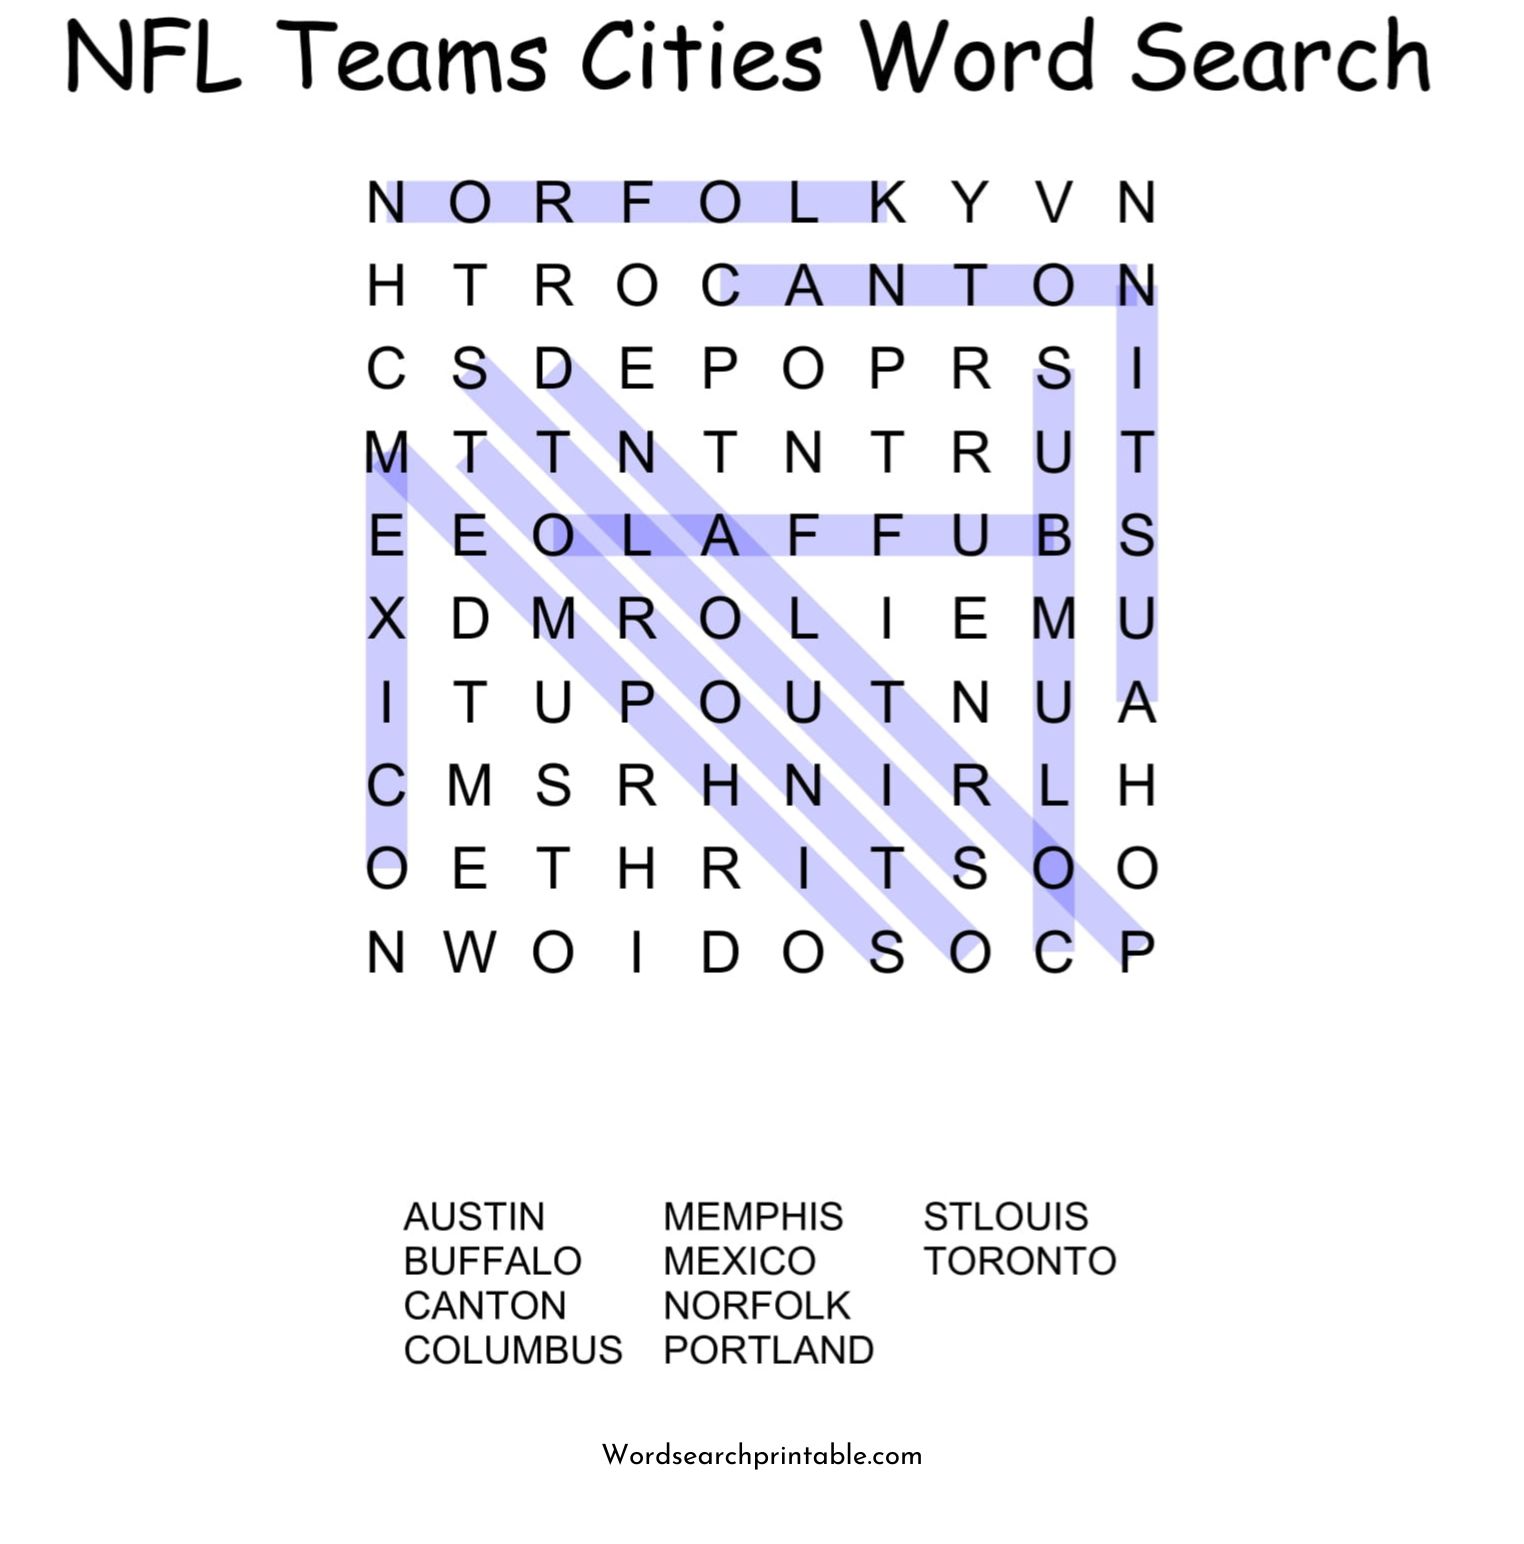 nfl teams cities word search puzzle solution